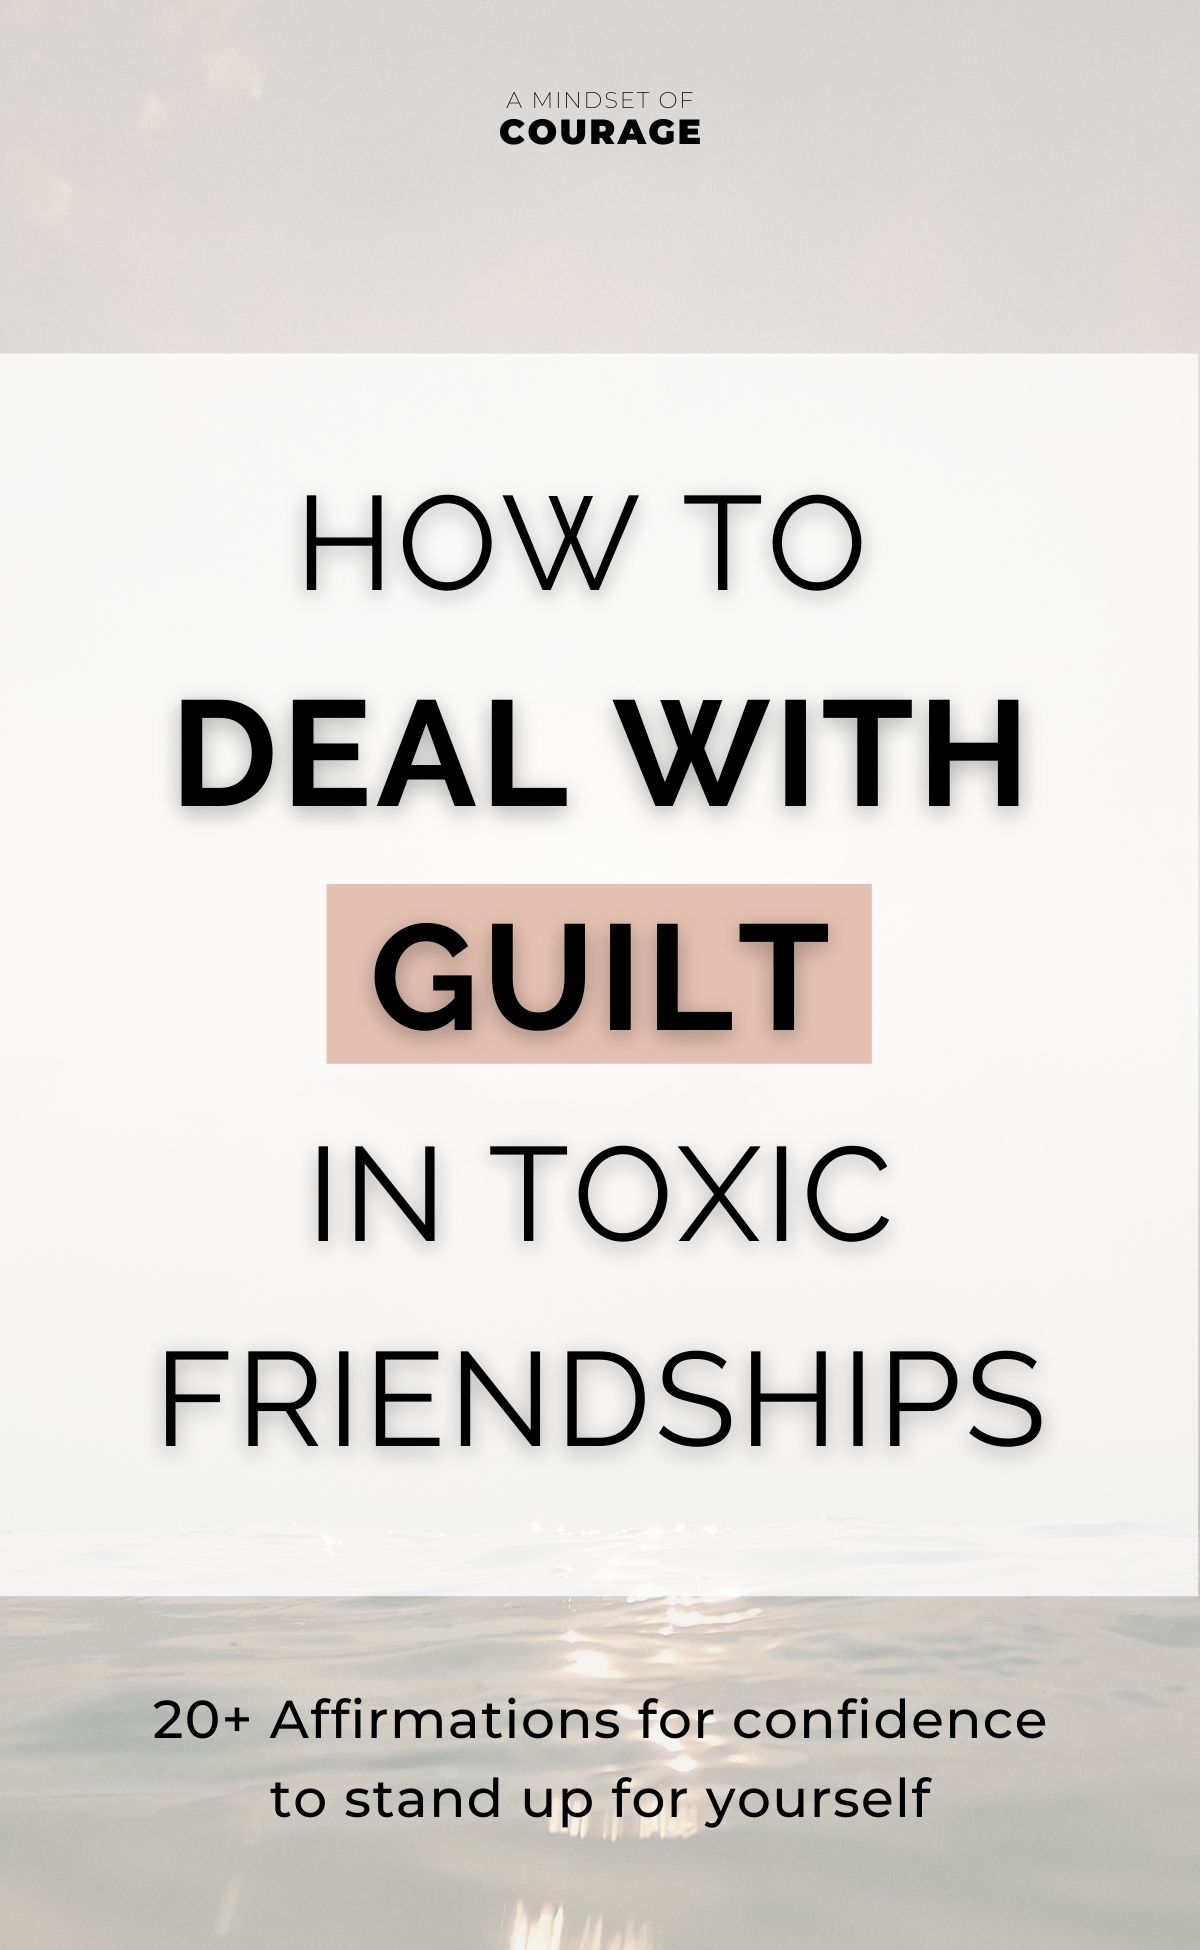 How to Deal with Guilt in Toxic Friendships